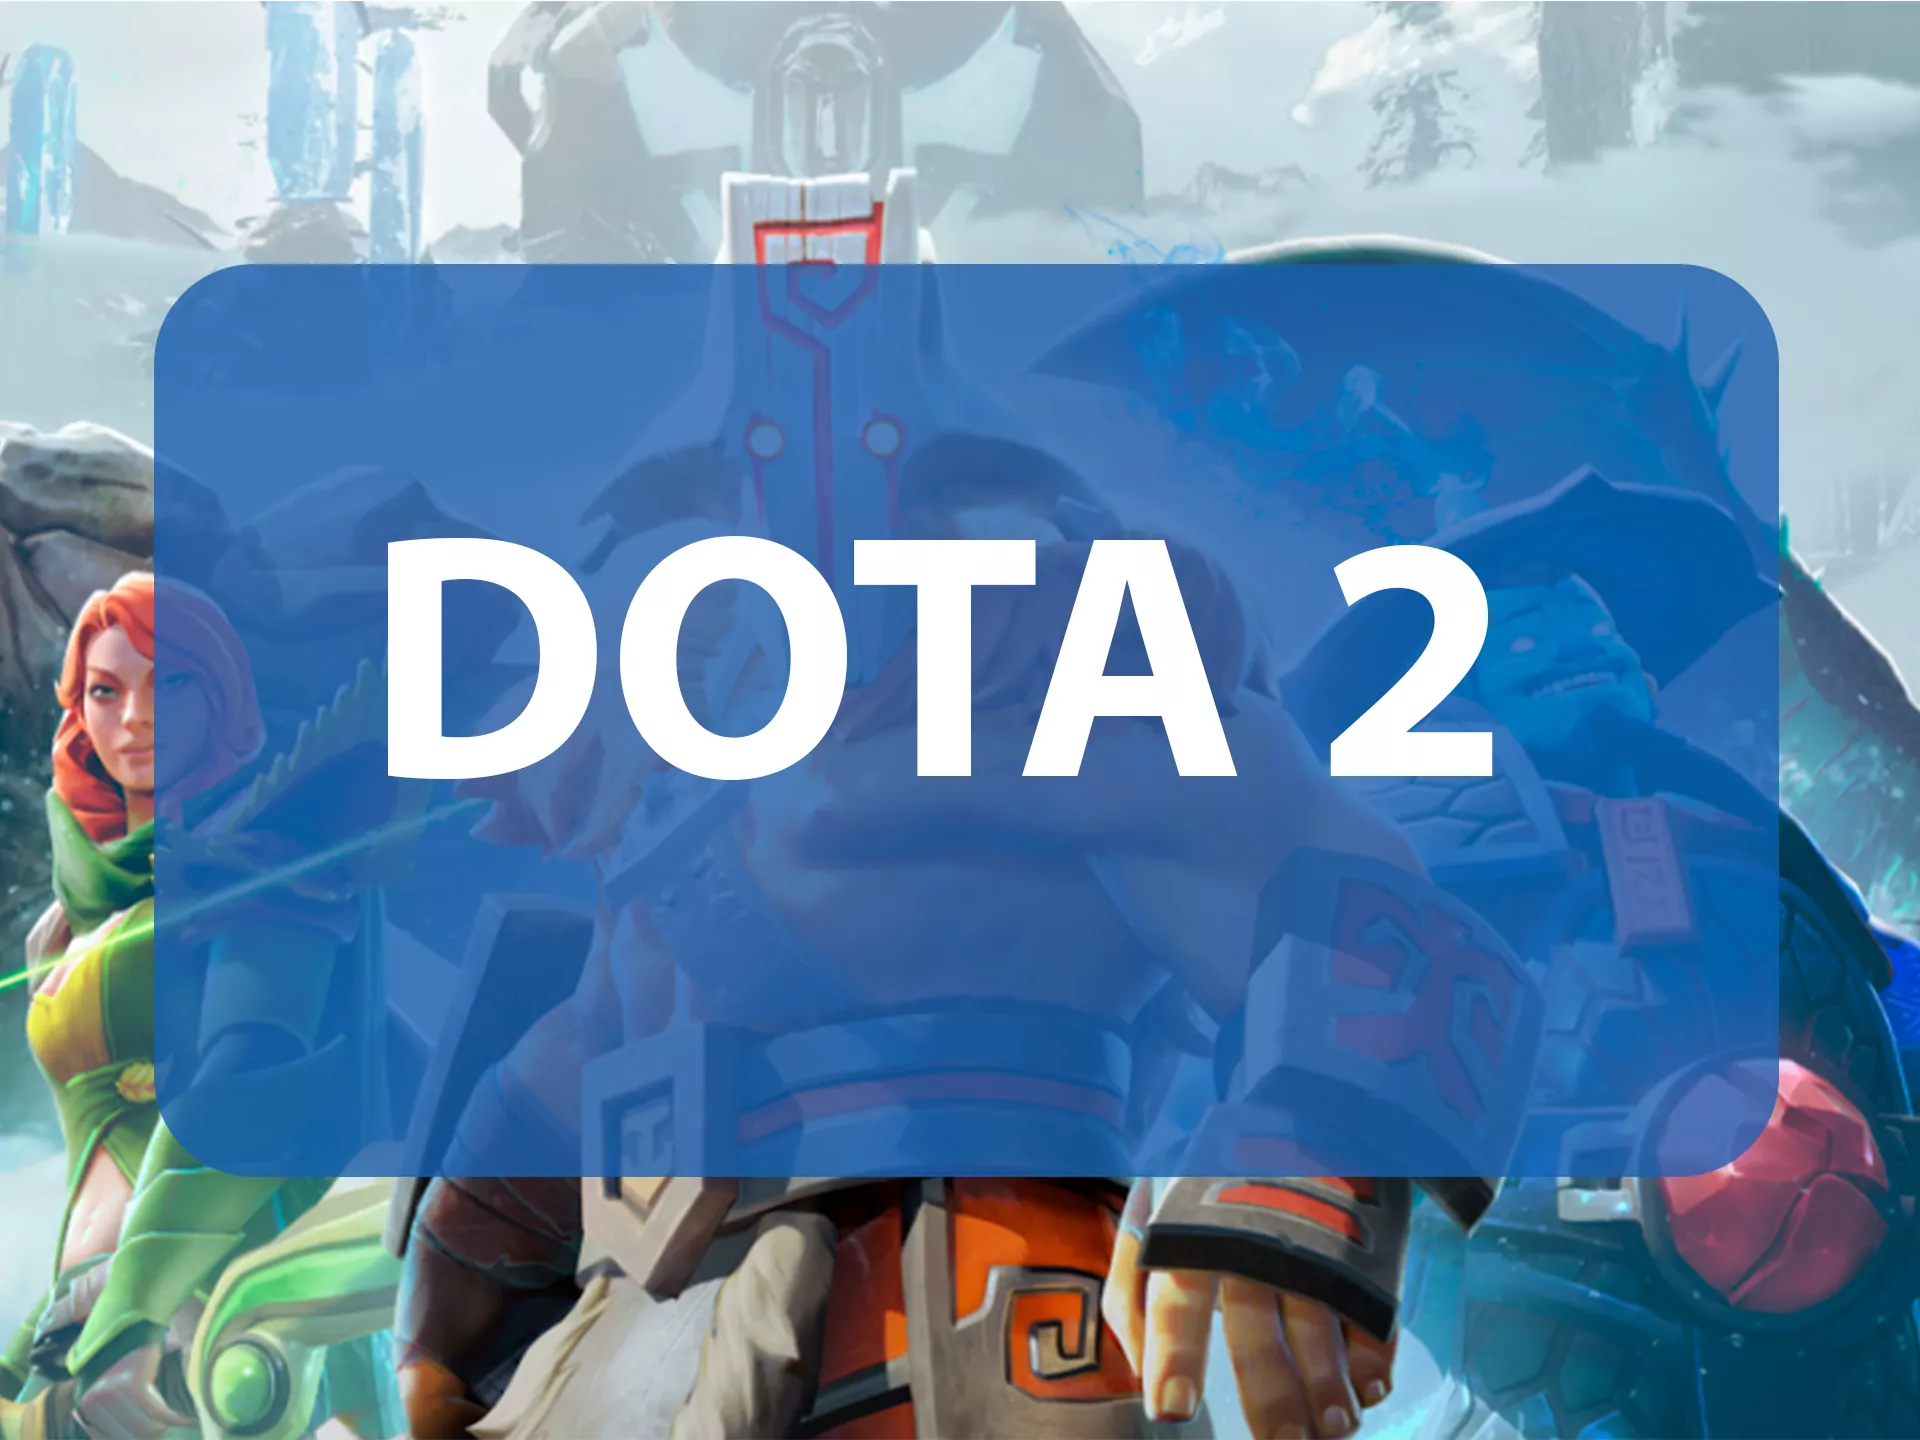 Dota 2 amateurs can also find attractive markets for betting at Betcity.